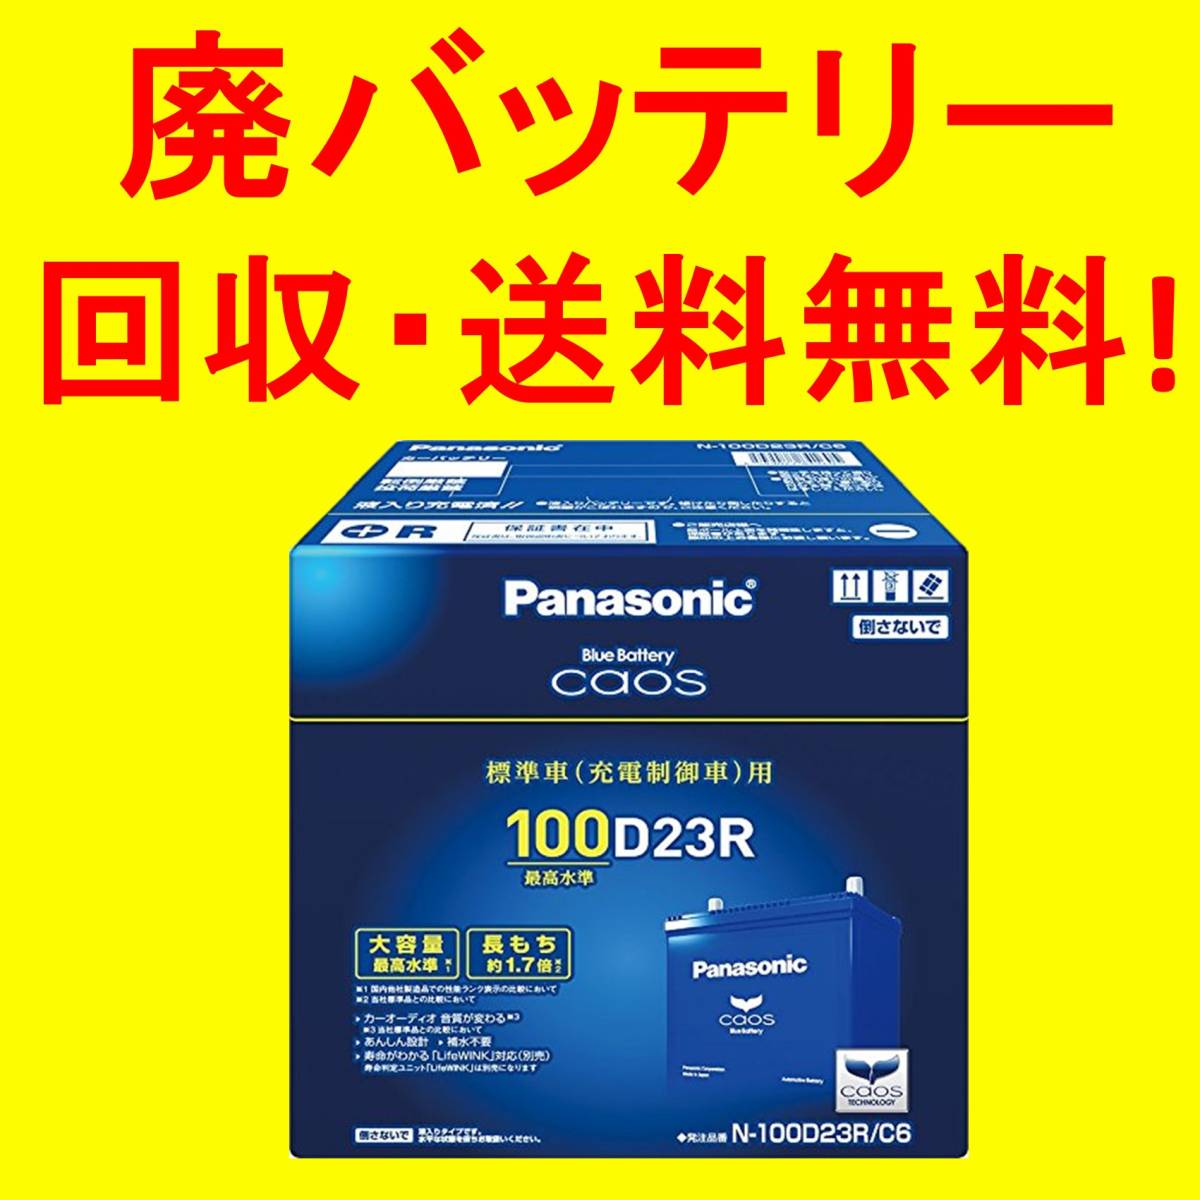  newest manufacture Rod [ waste battery recovery free shipping ] new goods unused Chaos N-100D23R/C6 Panasonic battery PANASONIC CAOS